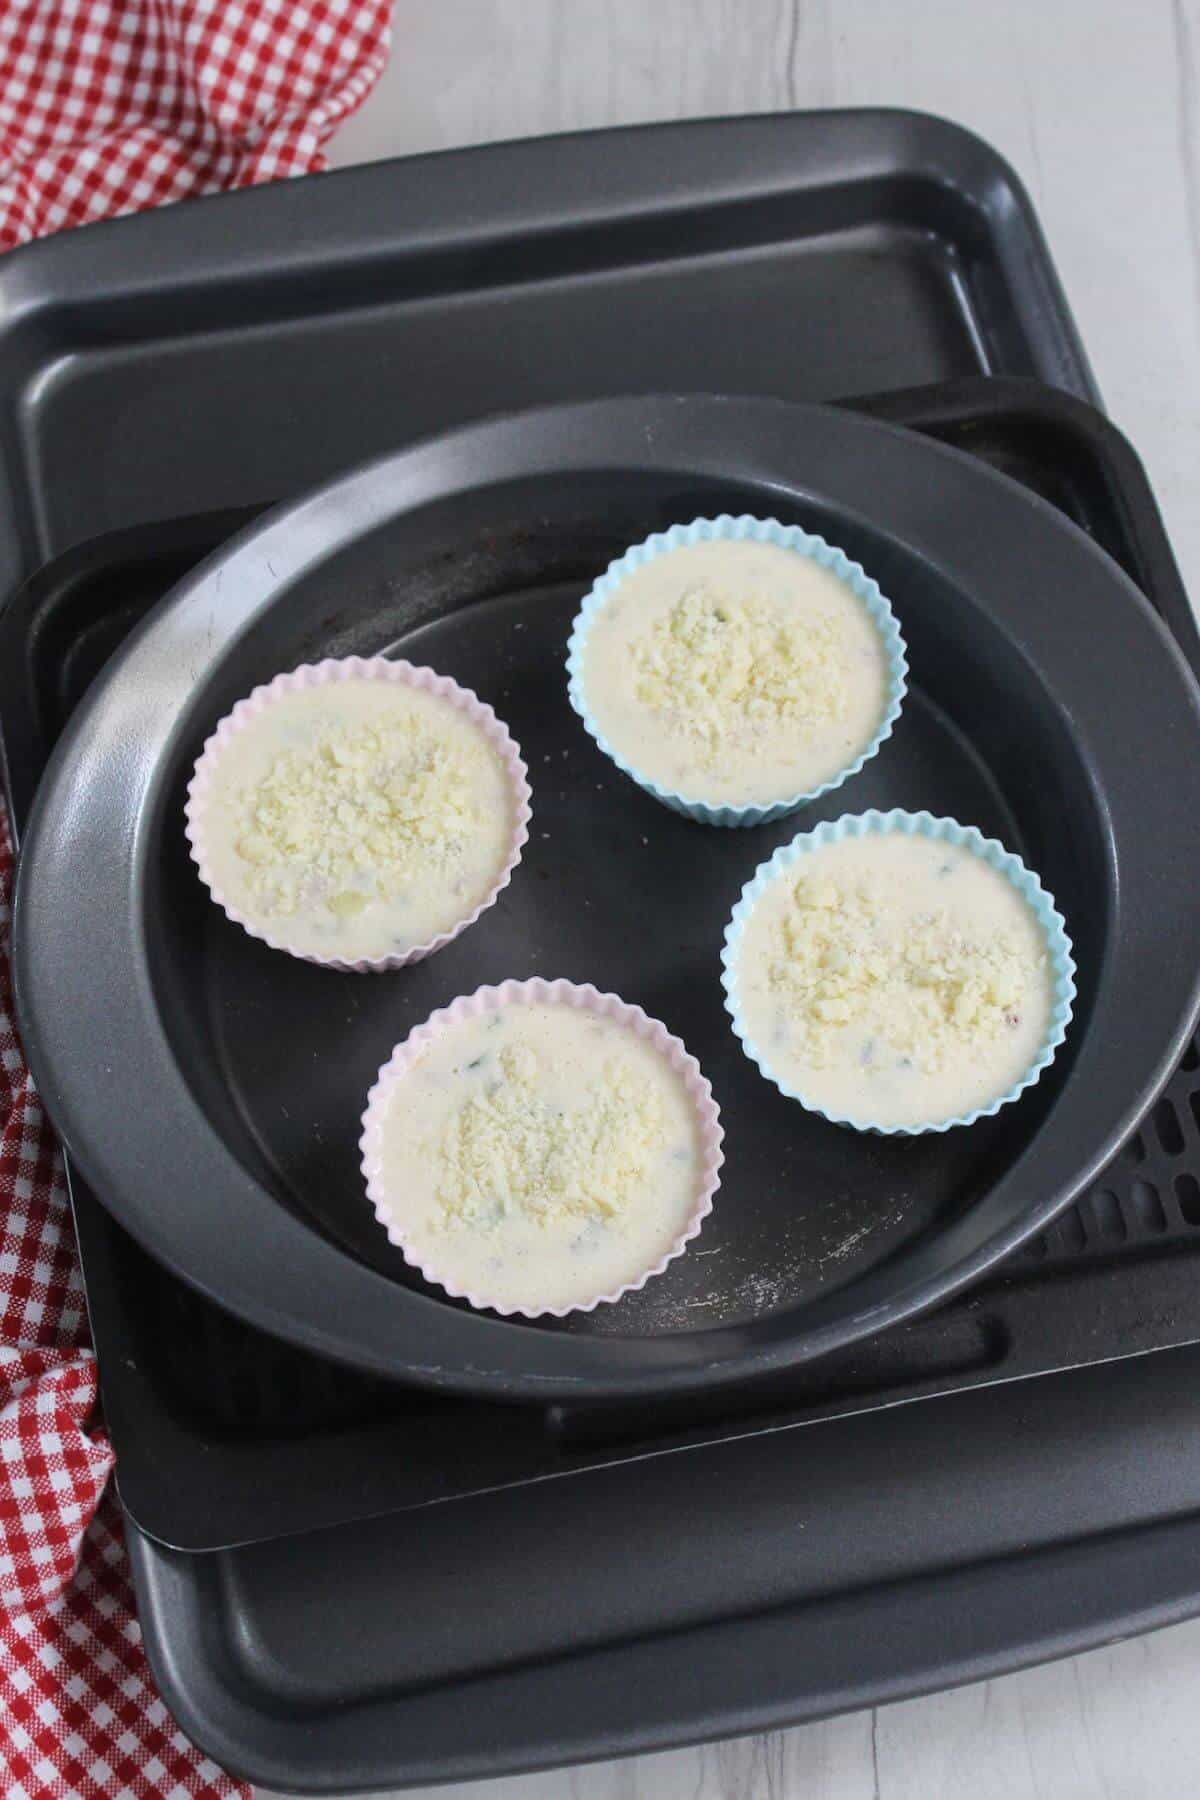 A group of uncooked egg white frittata muffins in a pan on air fryer tray.